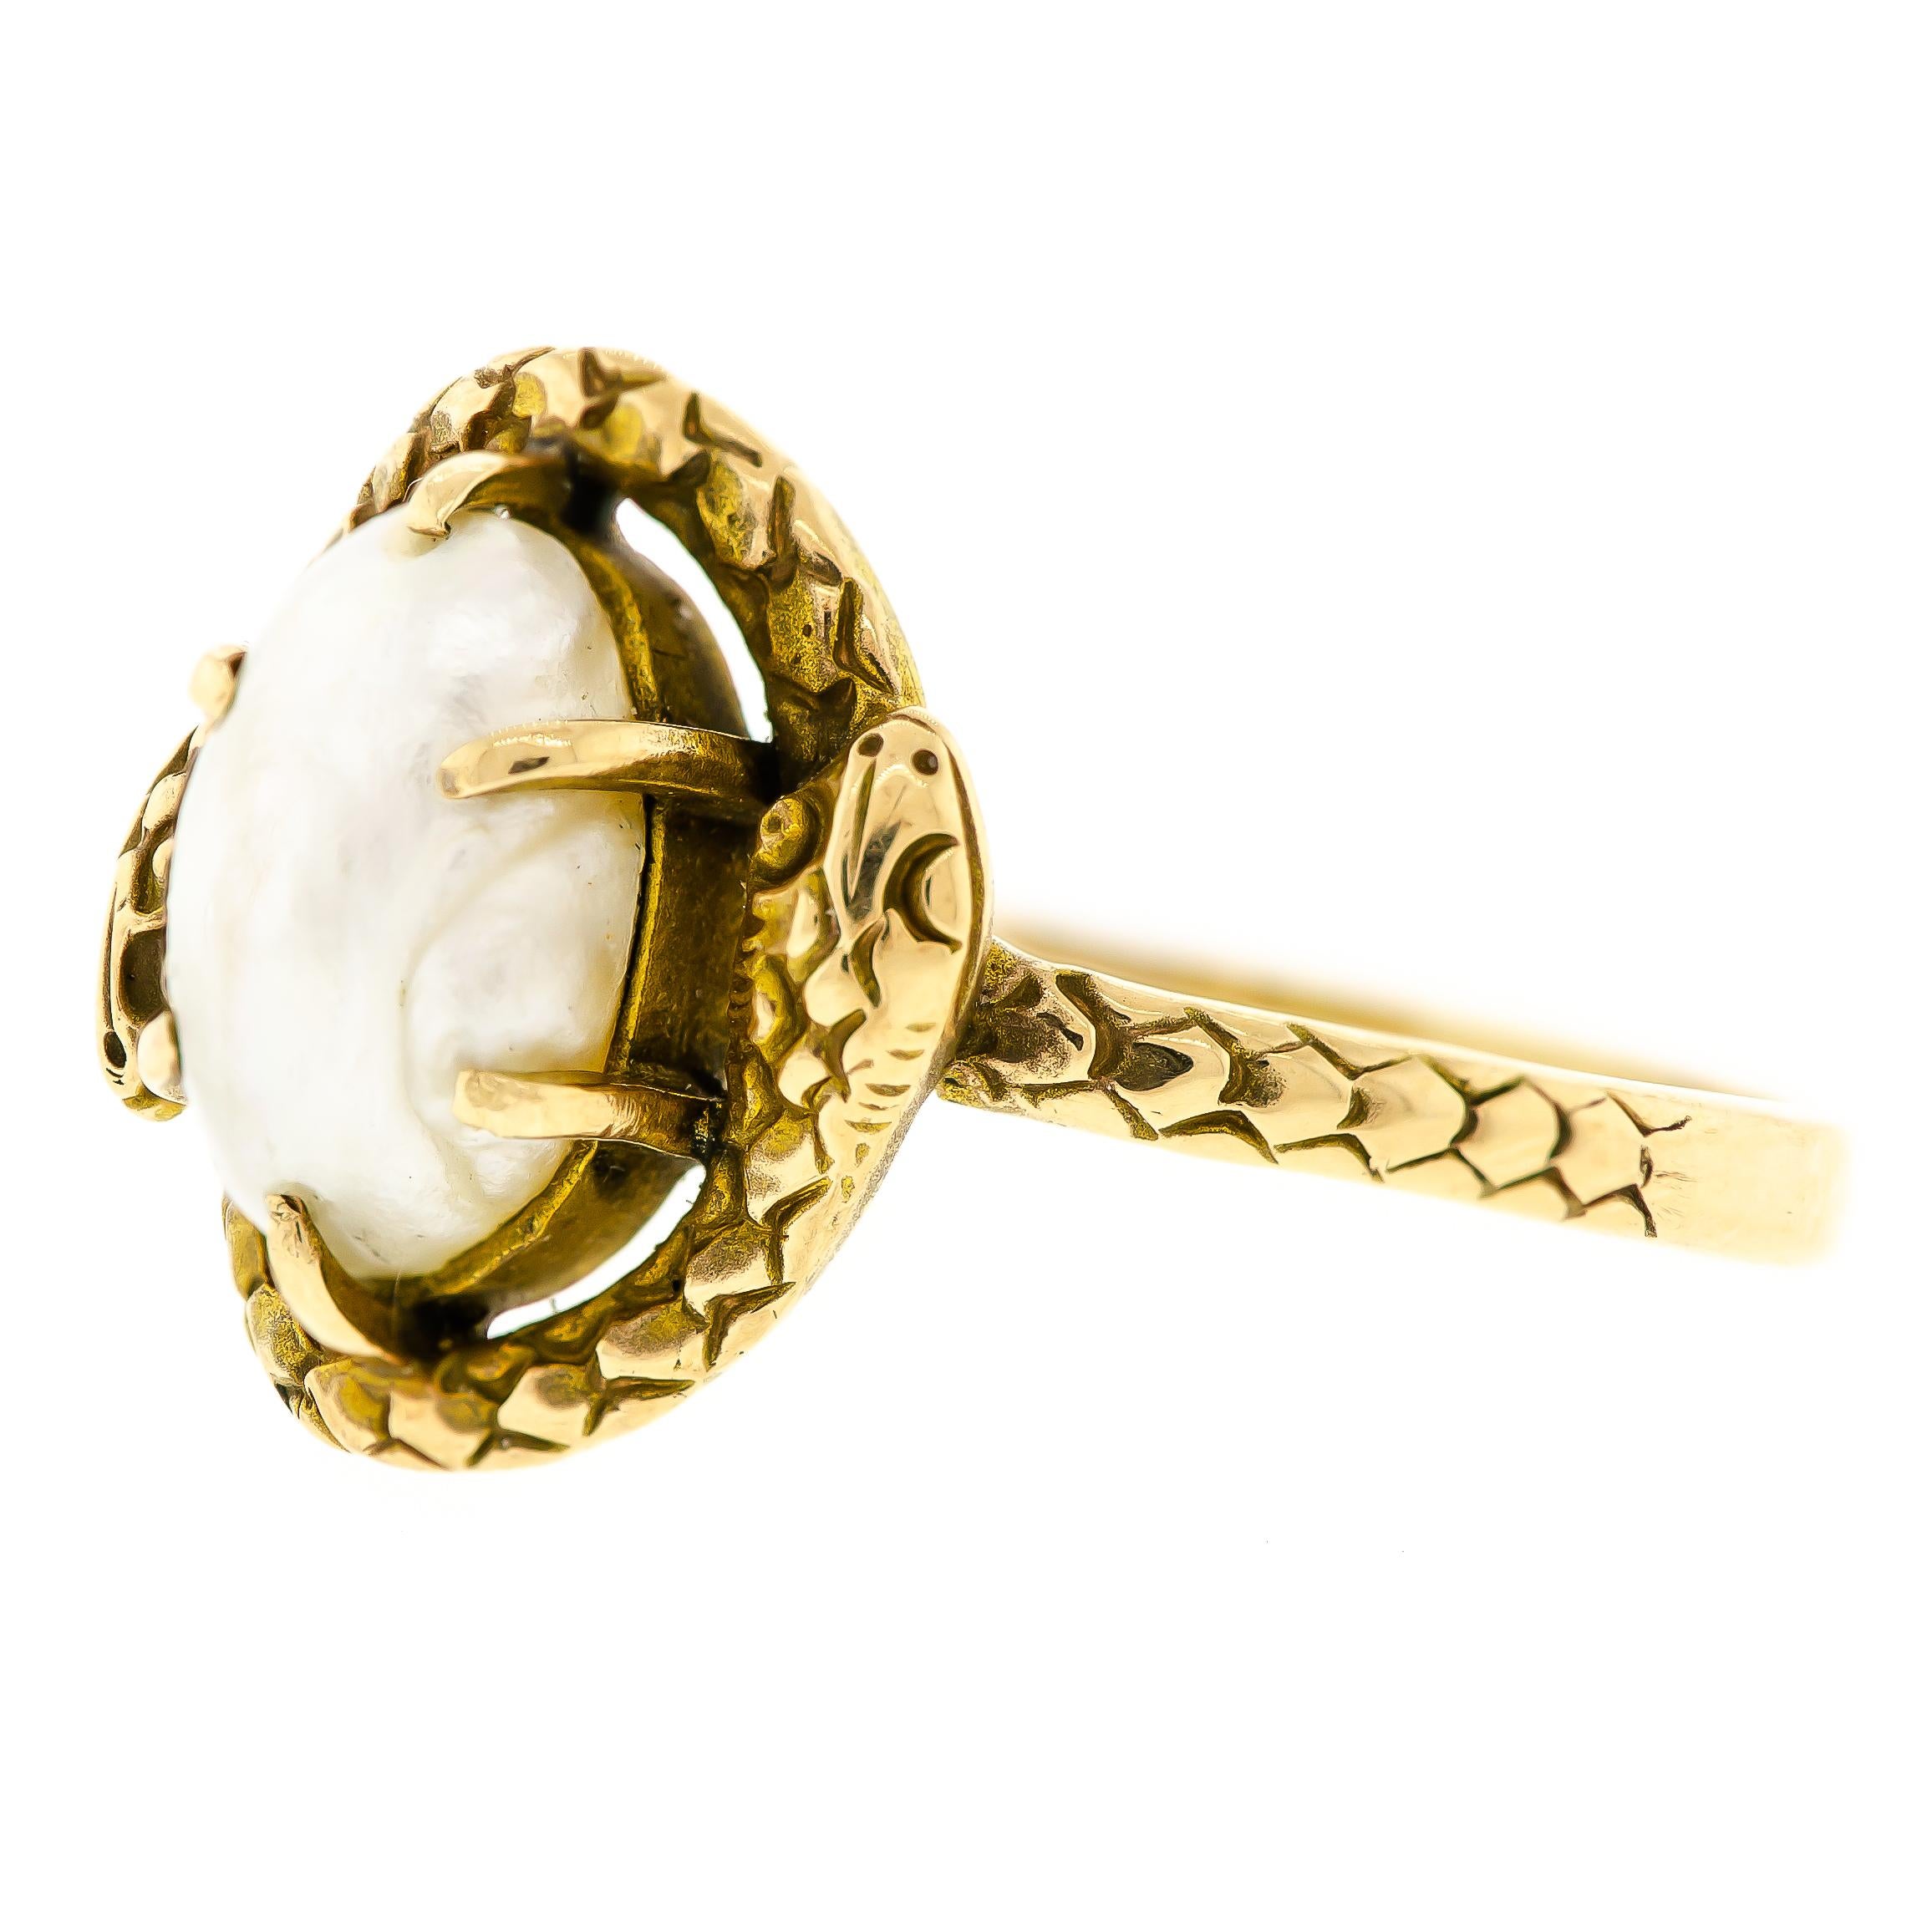 Charming antique pearl and 14kt yellow gold double snake ring centrally set with one baroque pearl prong set framed by  textured scaly double snake all rendered in 14 karat yellow gold.  14K A * makers mark on shank - currently about a size 6 3/4